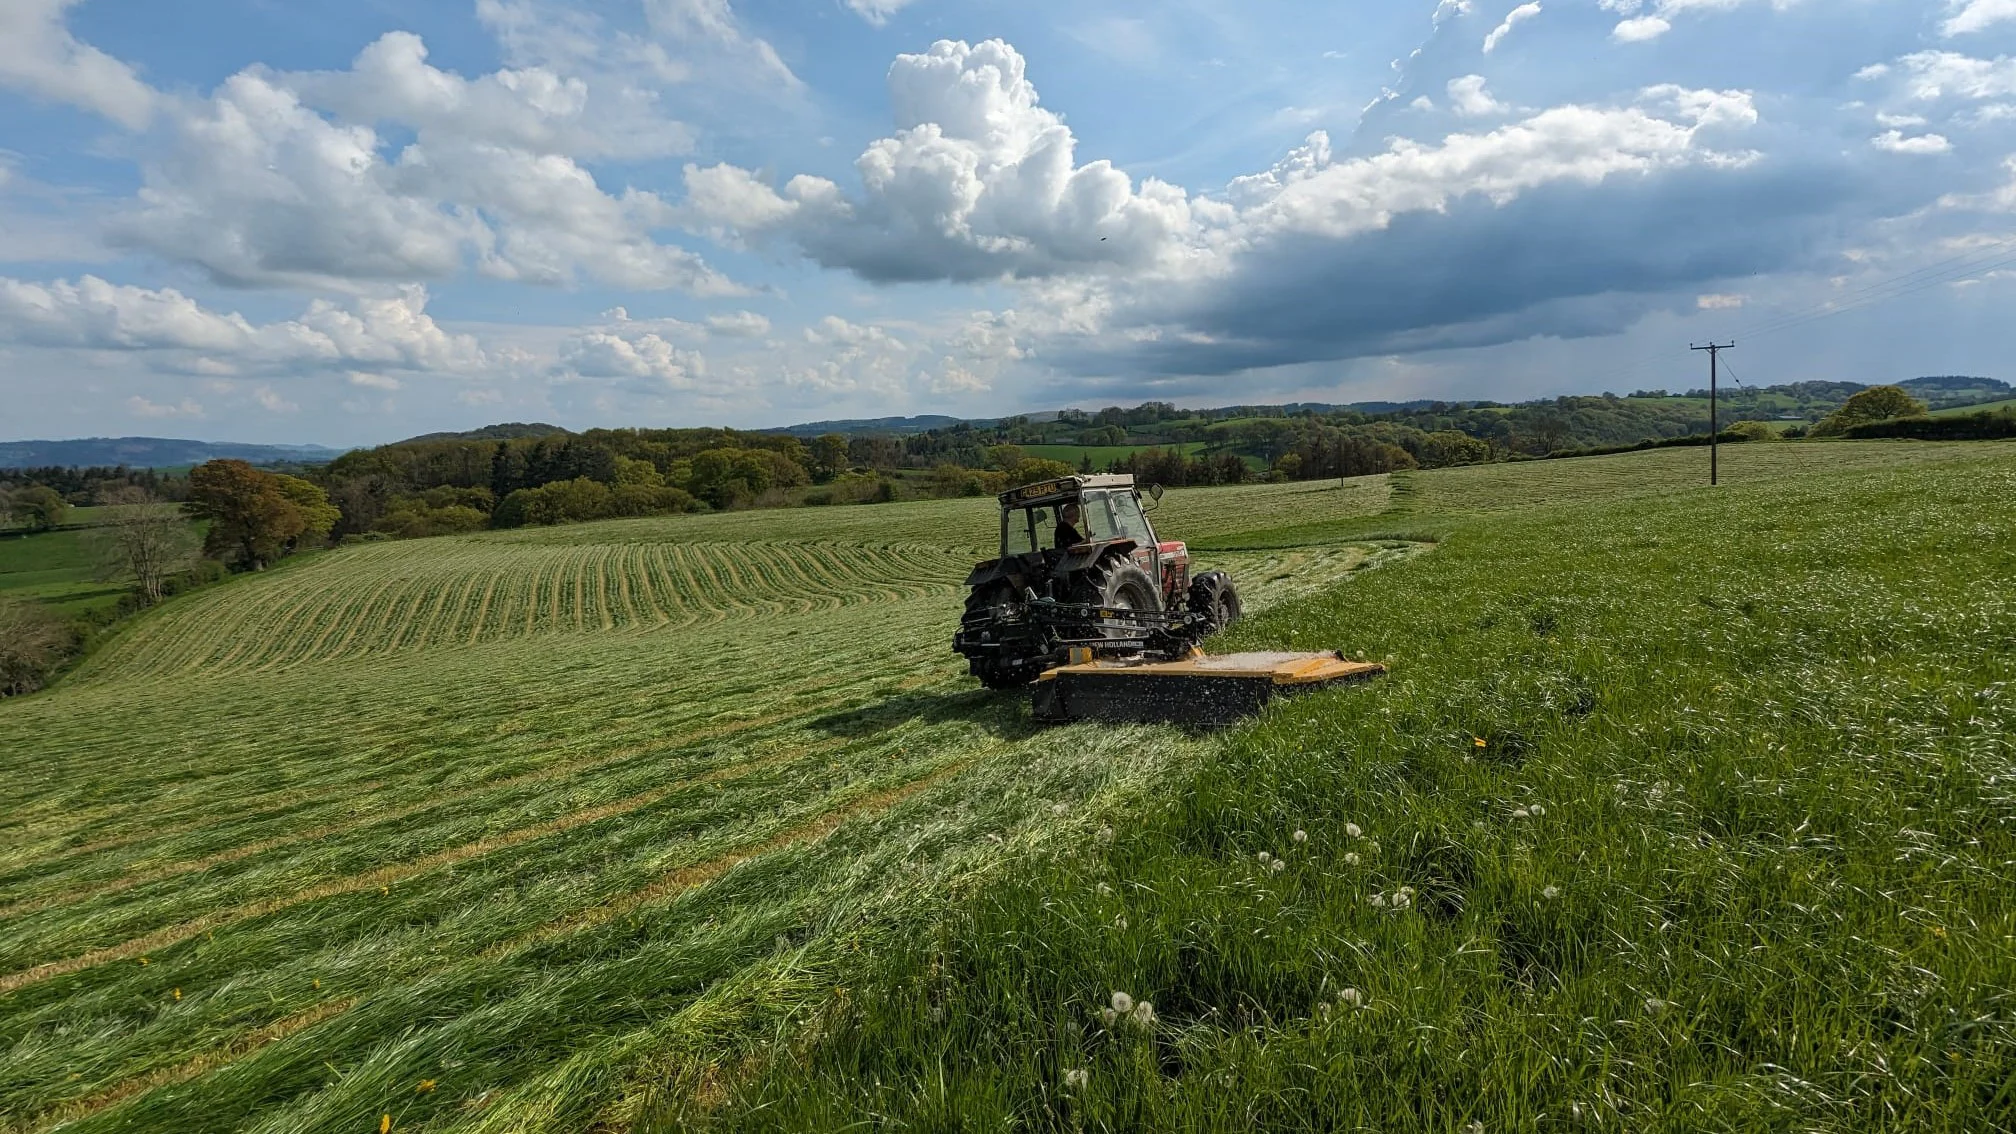 A tractor doing the first silage cut on a field